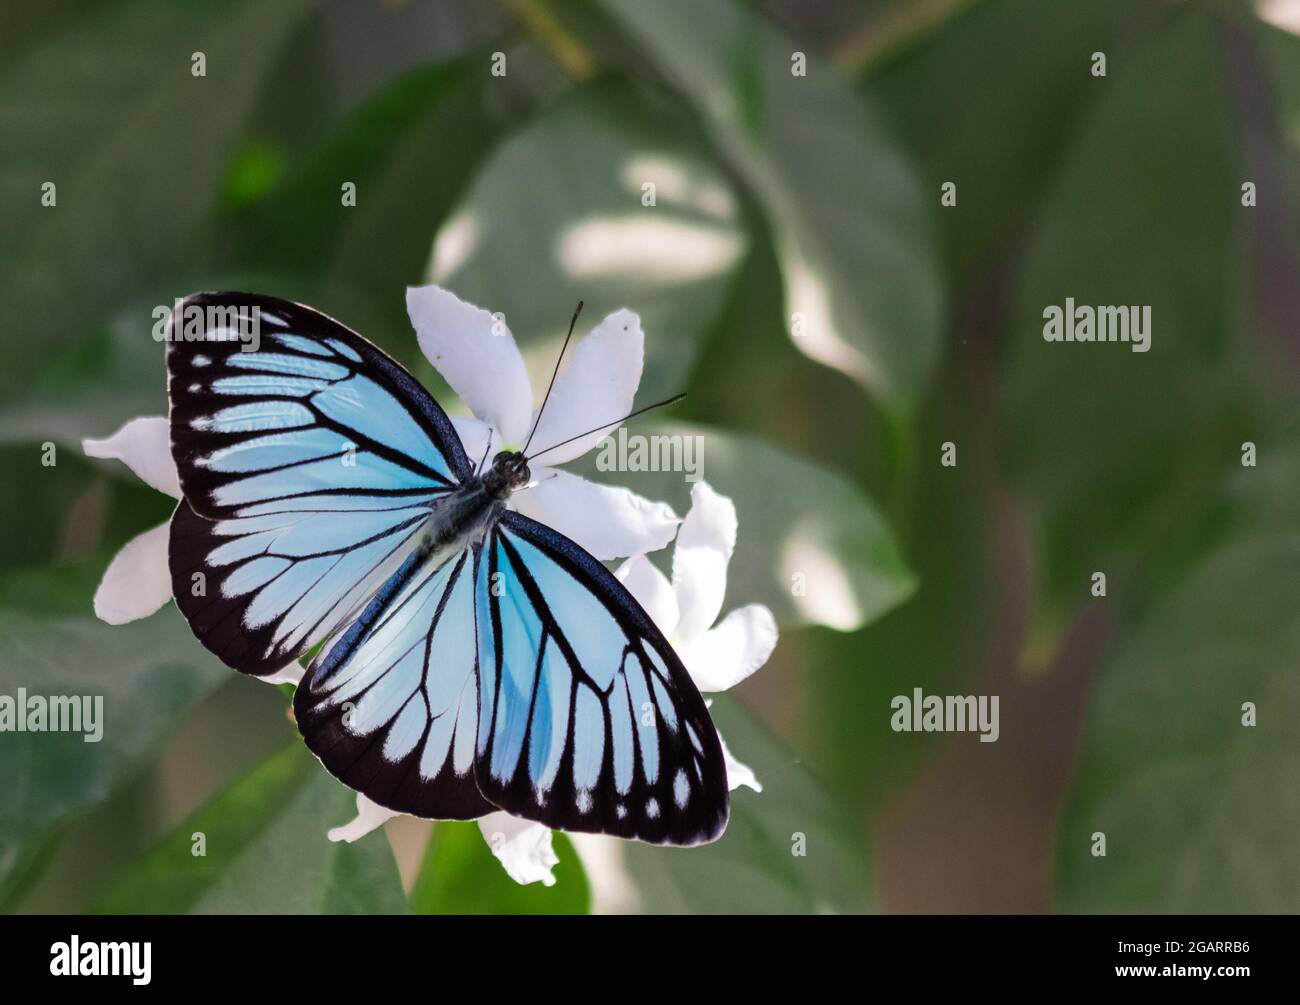 Blue tiger butterfly (tirumala limniace) on a white flower in Nepal Stock Photo